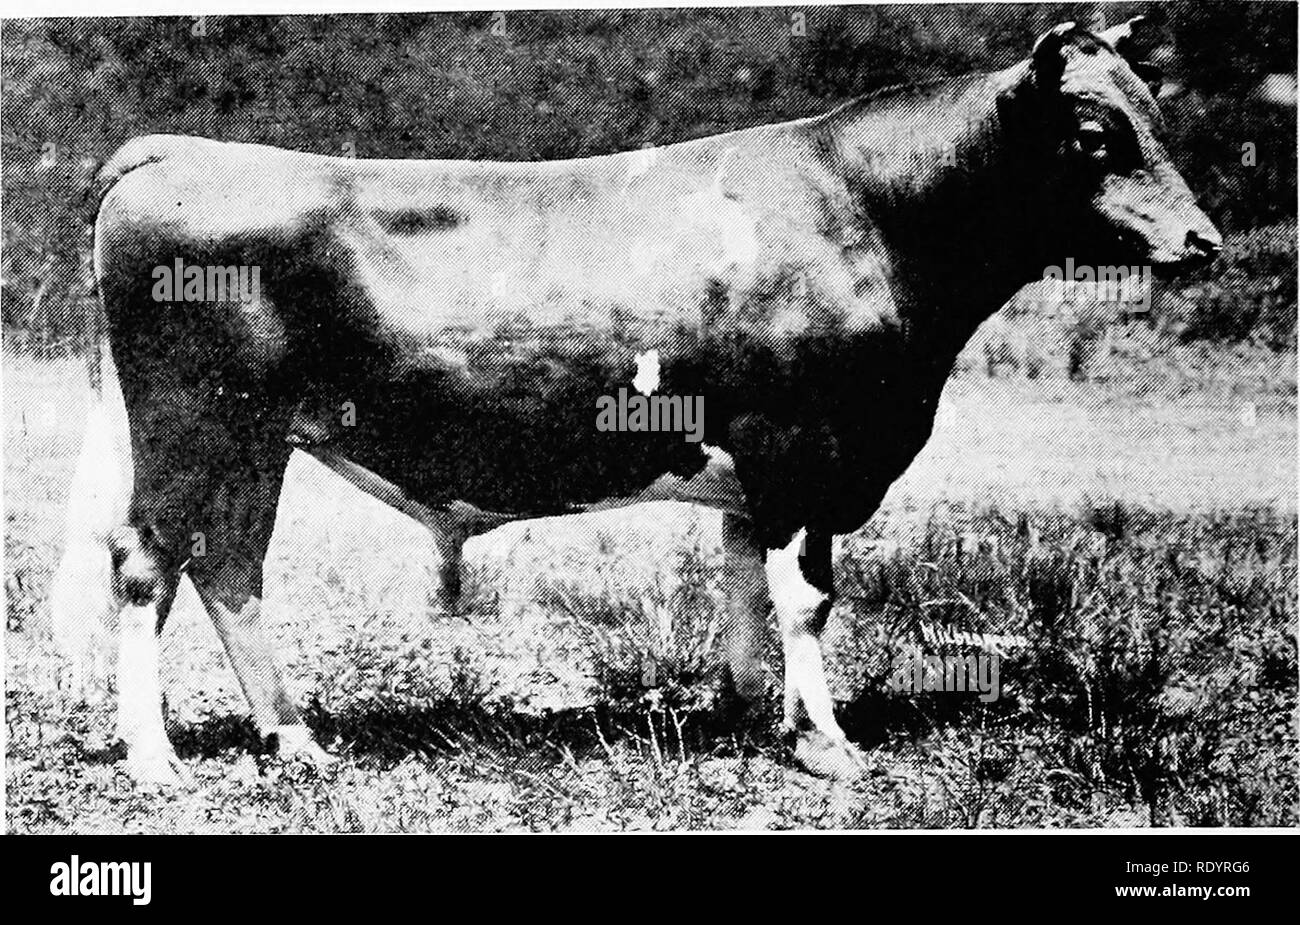 . The Guernsey breed. Guernsey cattle. 234 The Guernsey Breed. Langwater Advocate 2051-1—first prize, National Dairy Show, 1914. 4th Elmer of Sarnia 28125—Charles L. Hill. 5th Langwater Saracen 2S060—F. Lothrop Ames. 6th Langwater Crusader 28059—F. Lothrop Ames. Bull Calt under Six Months — 1st Langwater High Fiver 30365—F. Lothrop Ames. 2d Ladysmith's Cherub 30760—W. W. Marsh. 3d Westmoreland Glenwood Strong 30575—jL H. Tichenor. 4th Lady Robert's Souvenir 28945—W. W. Marsh. 5th Rex of Midlothian 30295—Maple Farm of Midlothian. 6th Royal of Bailey Falls 30433—Bailey Falls Farm, Oglesby, 111. Stock Photo